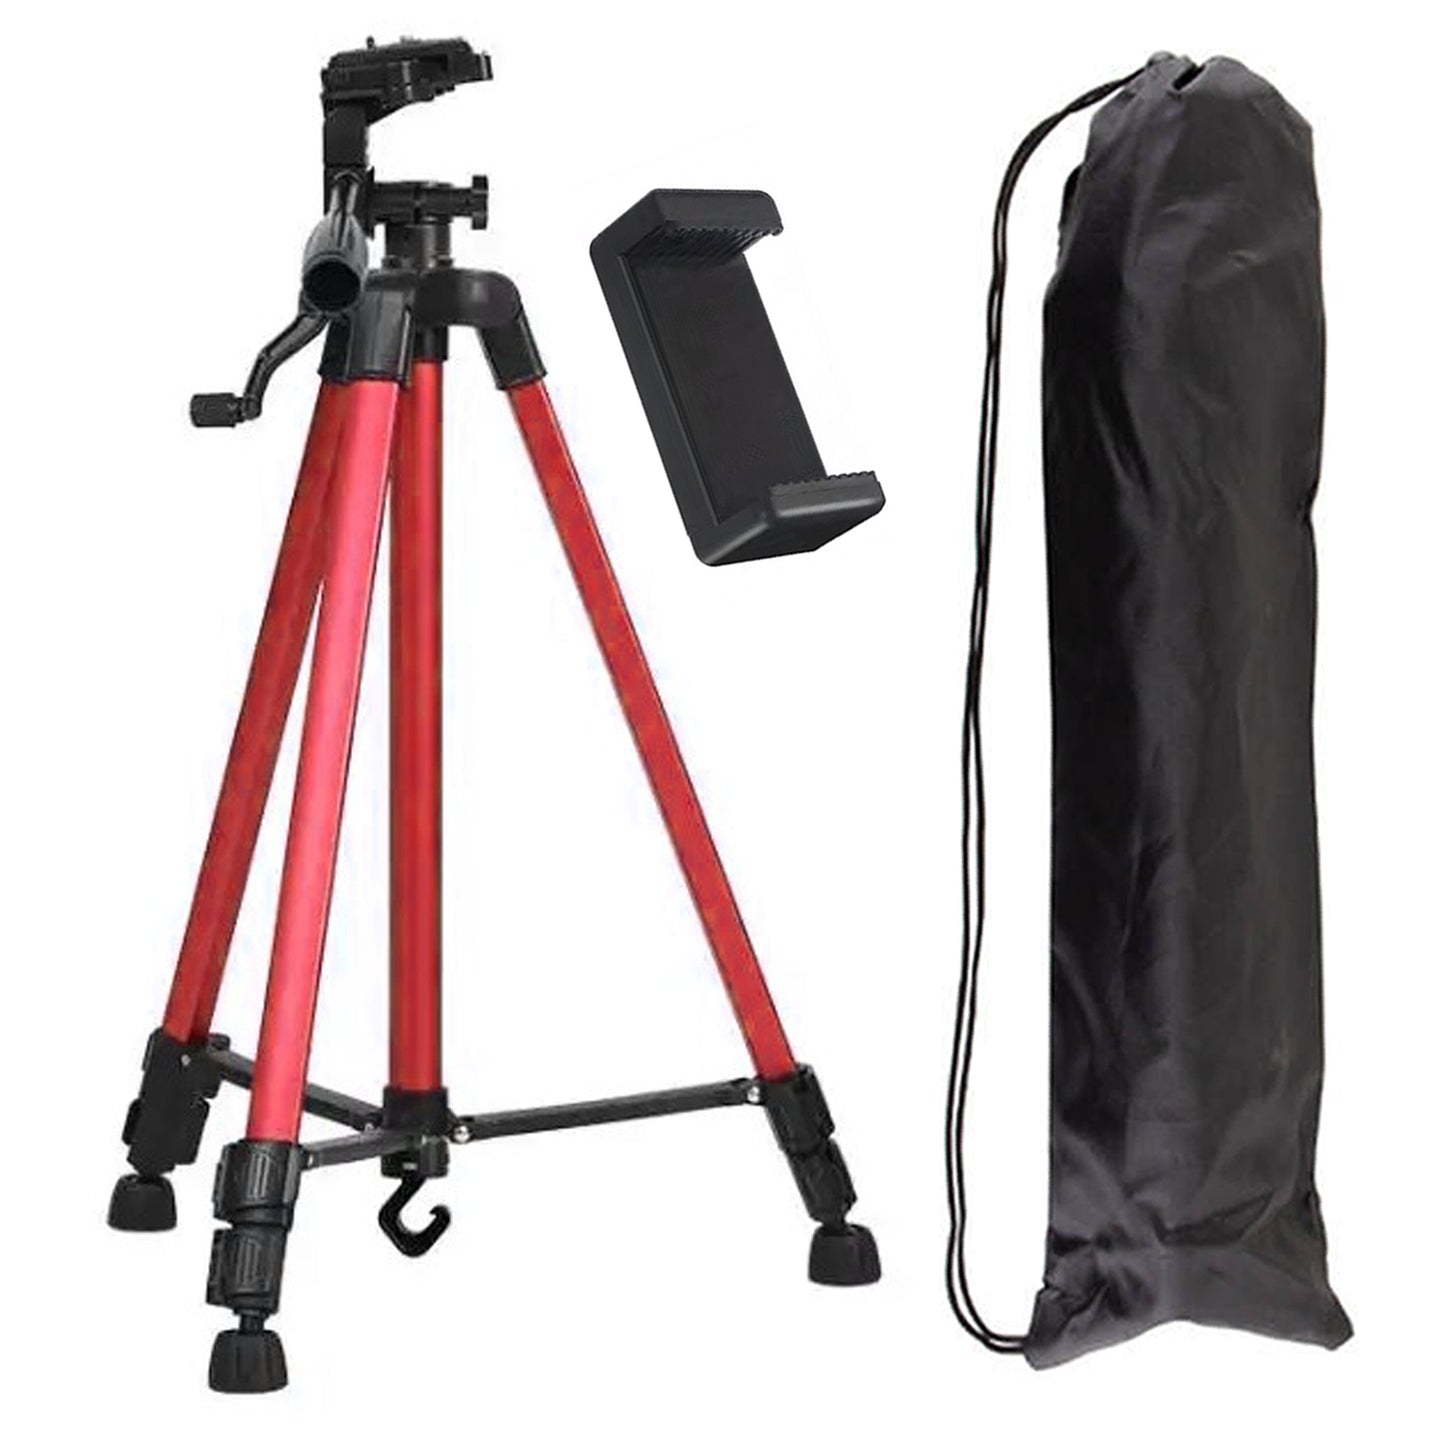 WRADER Metal Tripod with Clip Tripod Stand for Mobile DSLR Camera and Video Camera Tripod  (Black, Supports Up to 5000 g)